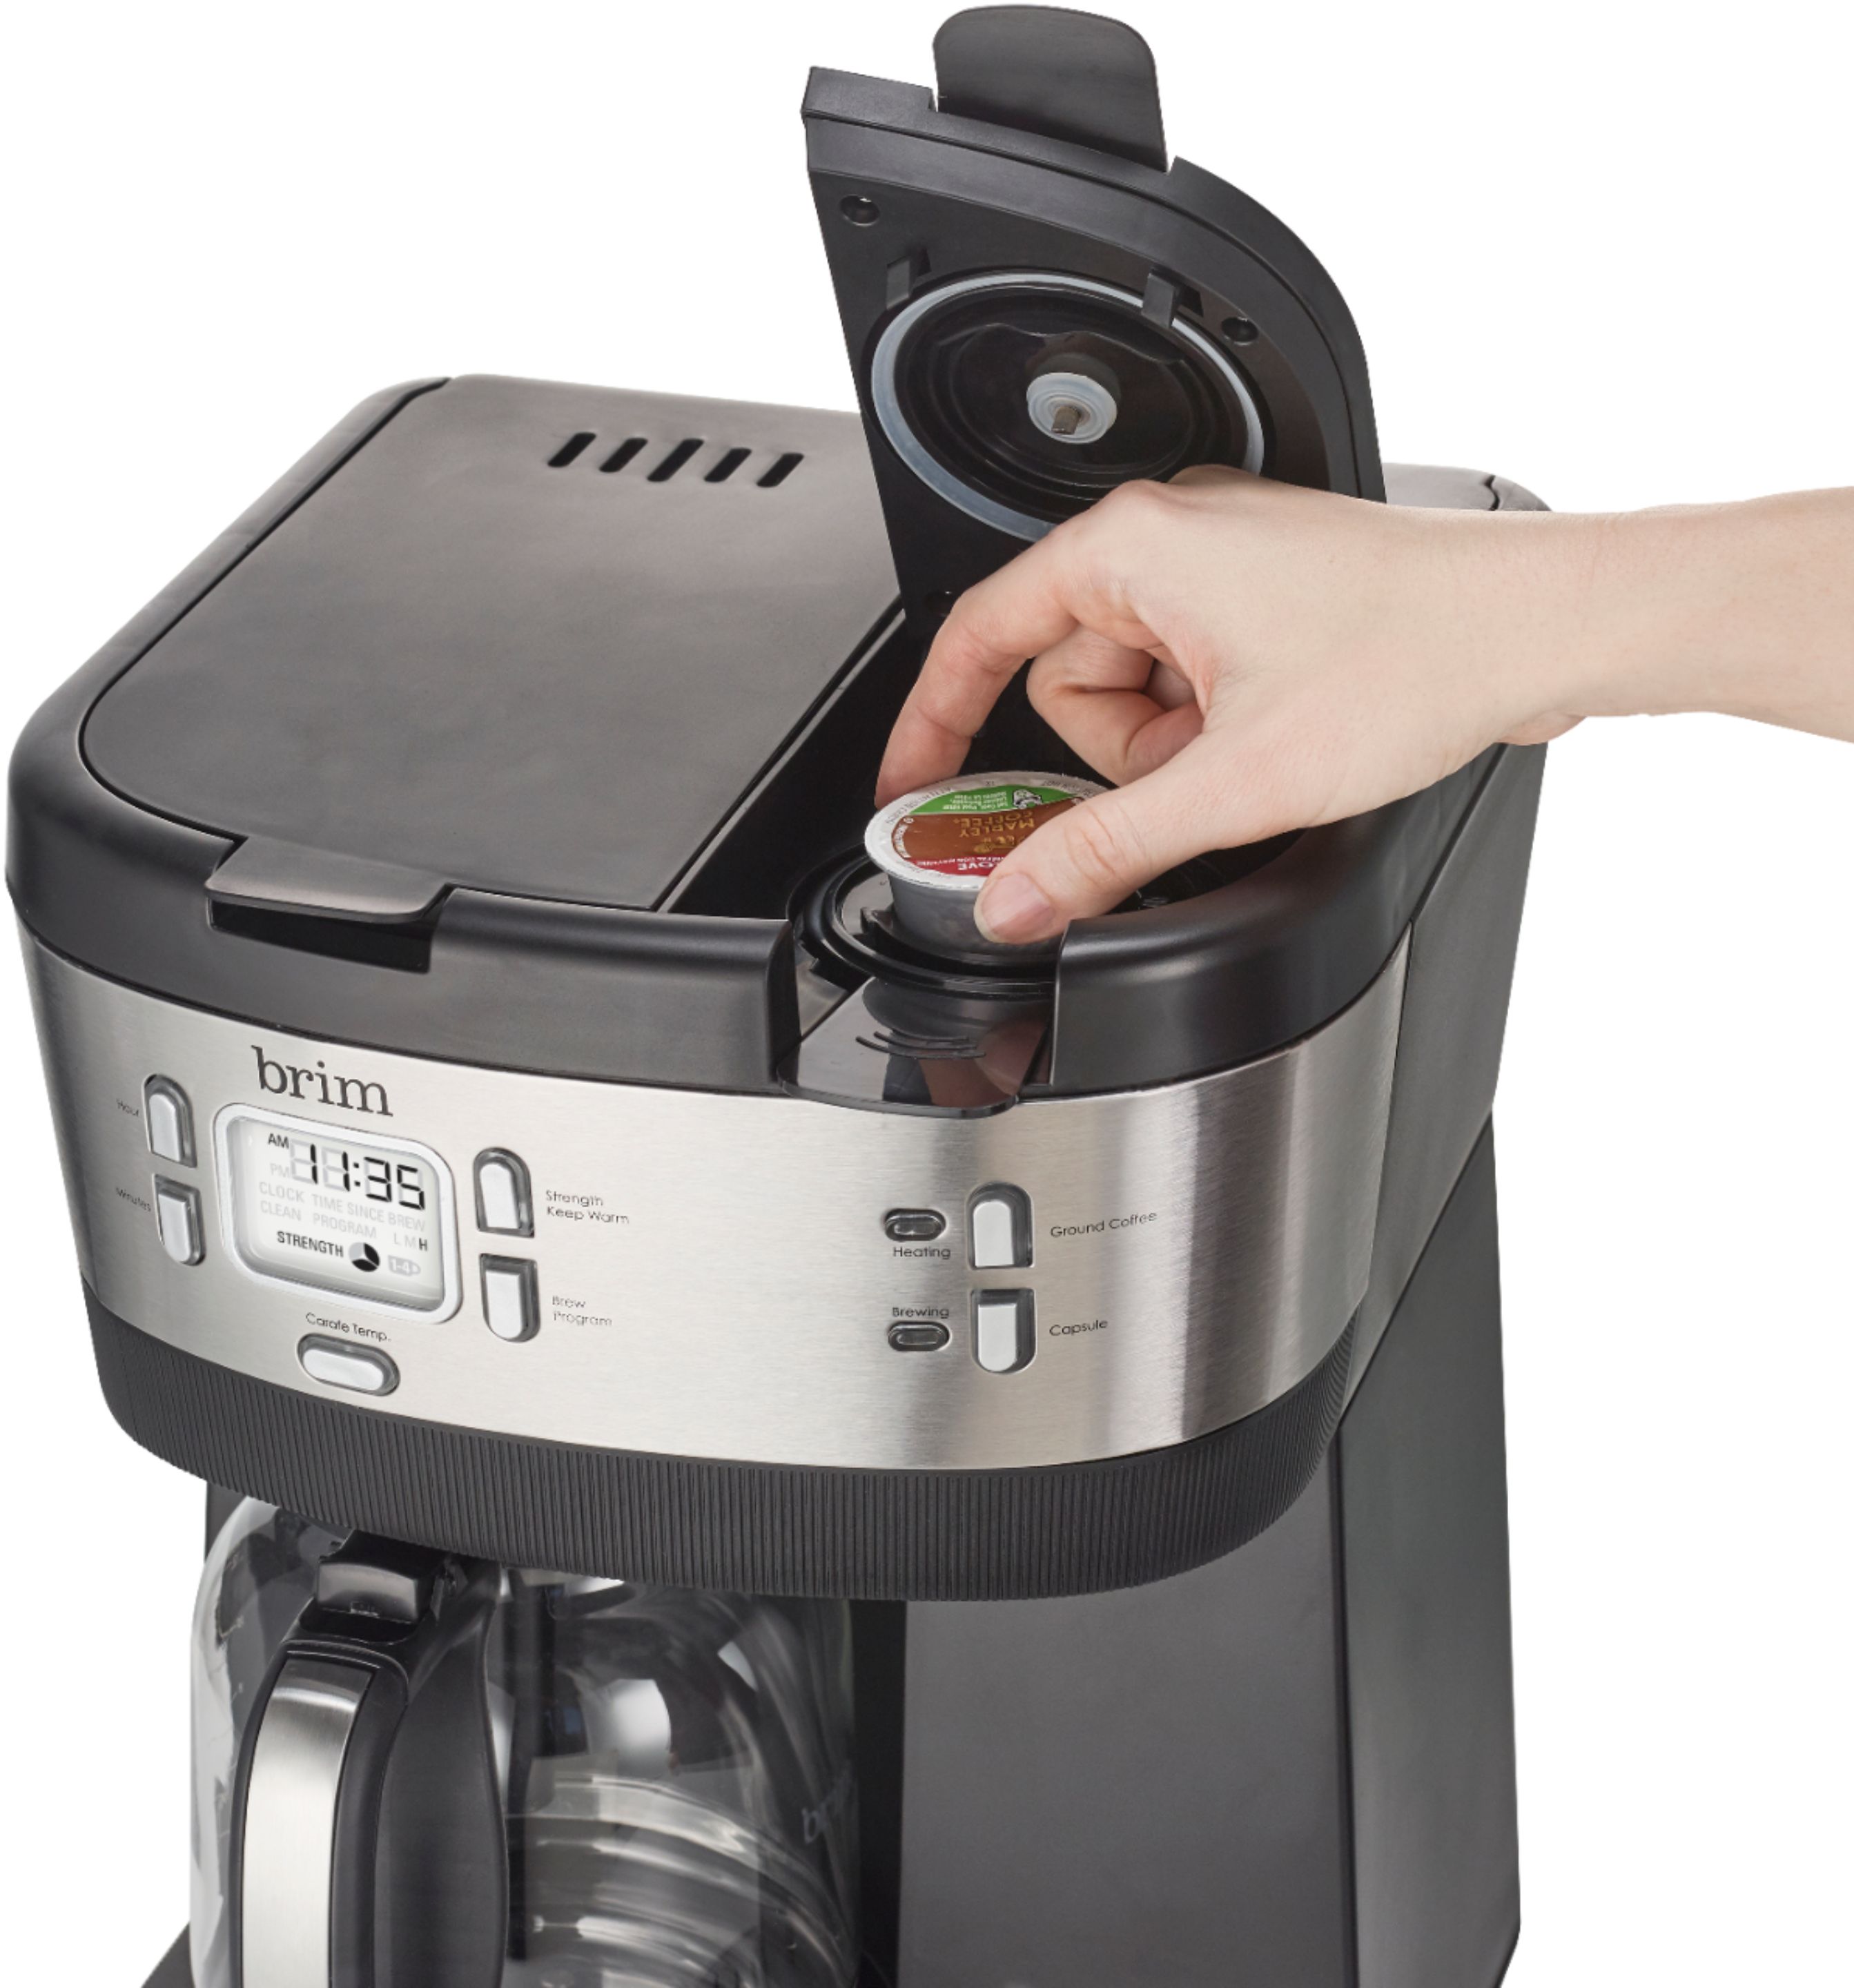 14 Cup Programmable Coffee maker, Stainless Steel - BRIM